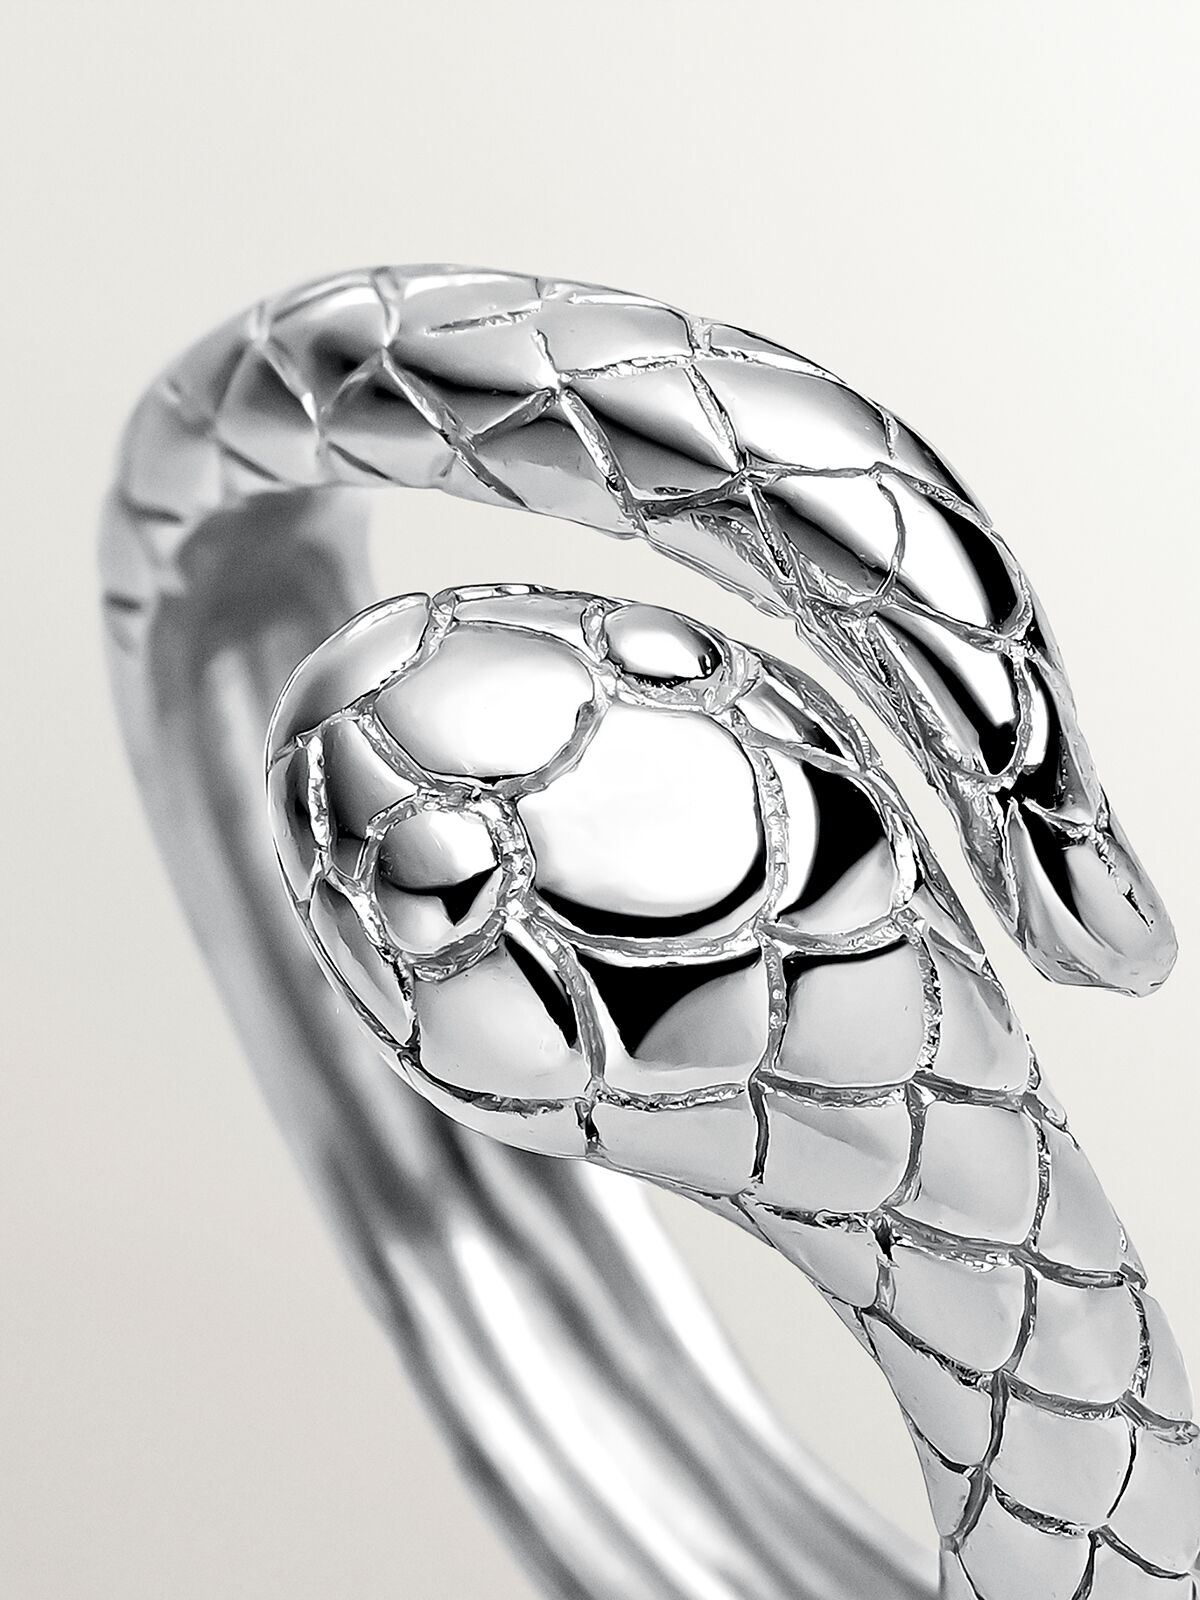 928 Silver Ring with Snake Design | Aristocrazy